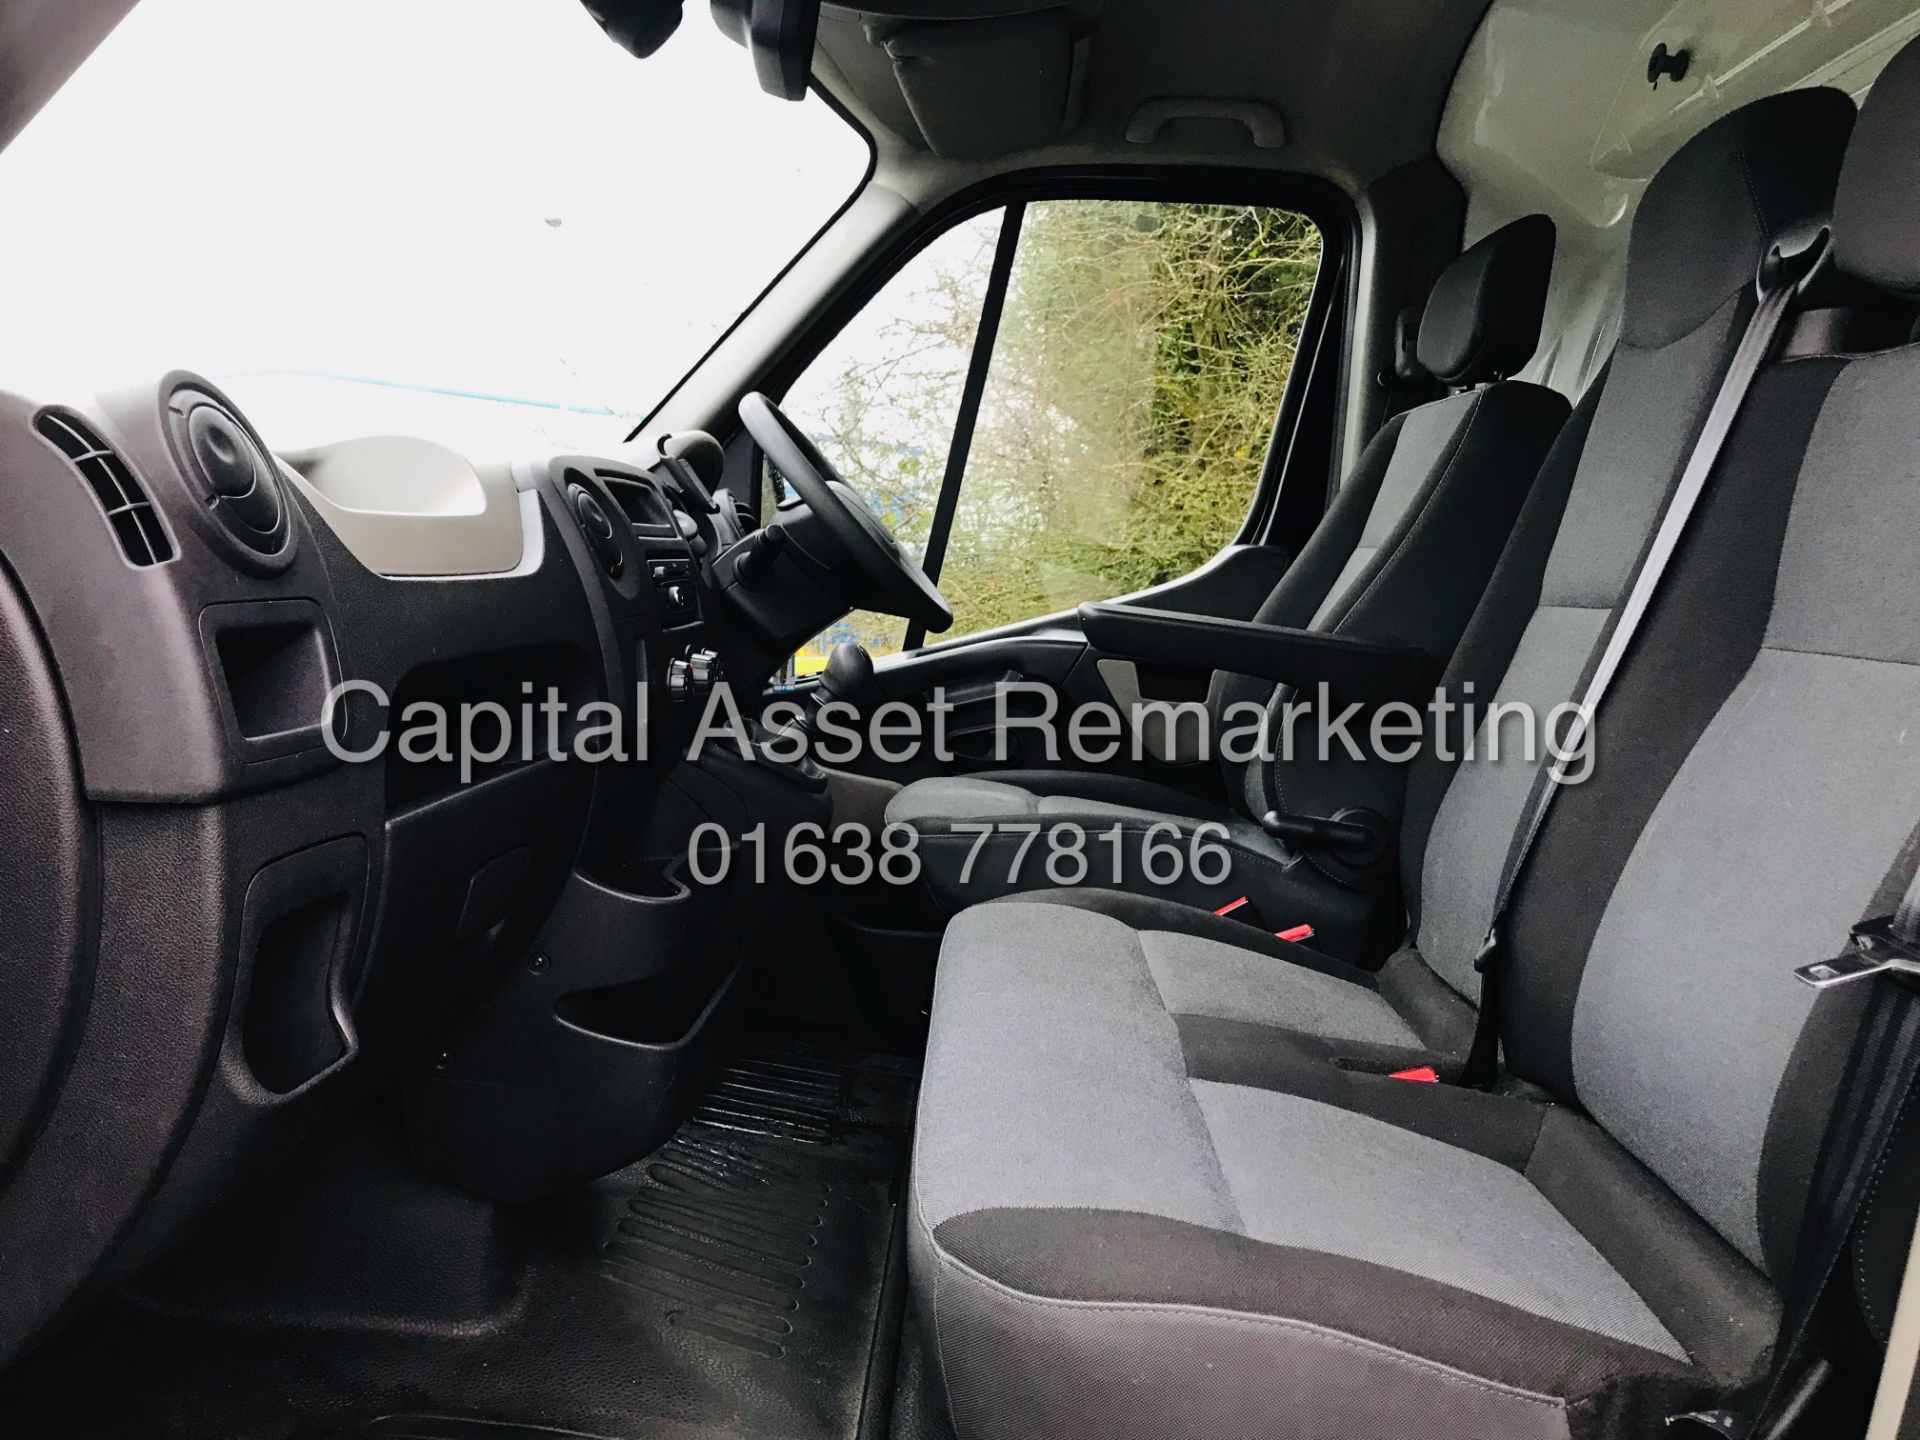 On Sale RENAULT MASTER 2.3DCI LM35 LWB (2015 MODEL) 1 OWNER - AIR CON -ELEC PACK *RARE 165BHP - - Image 11 of 12